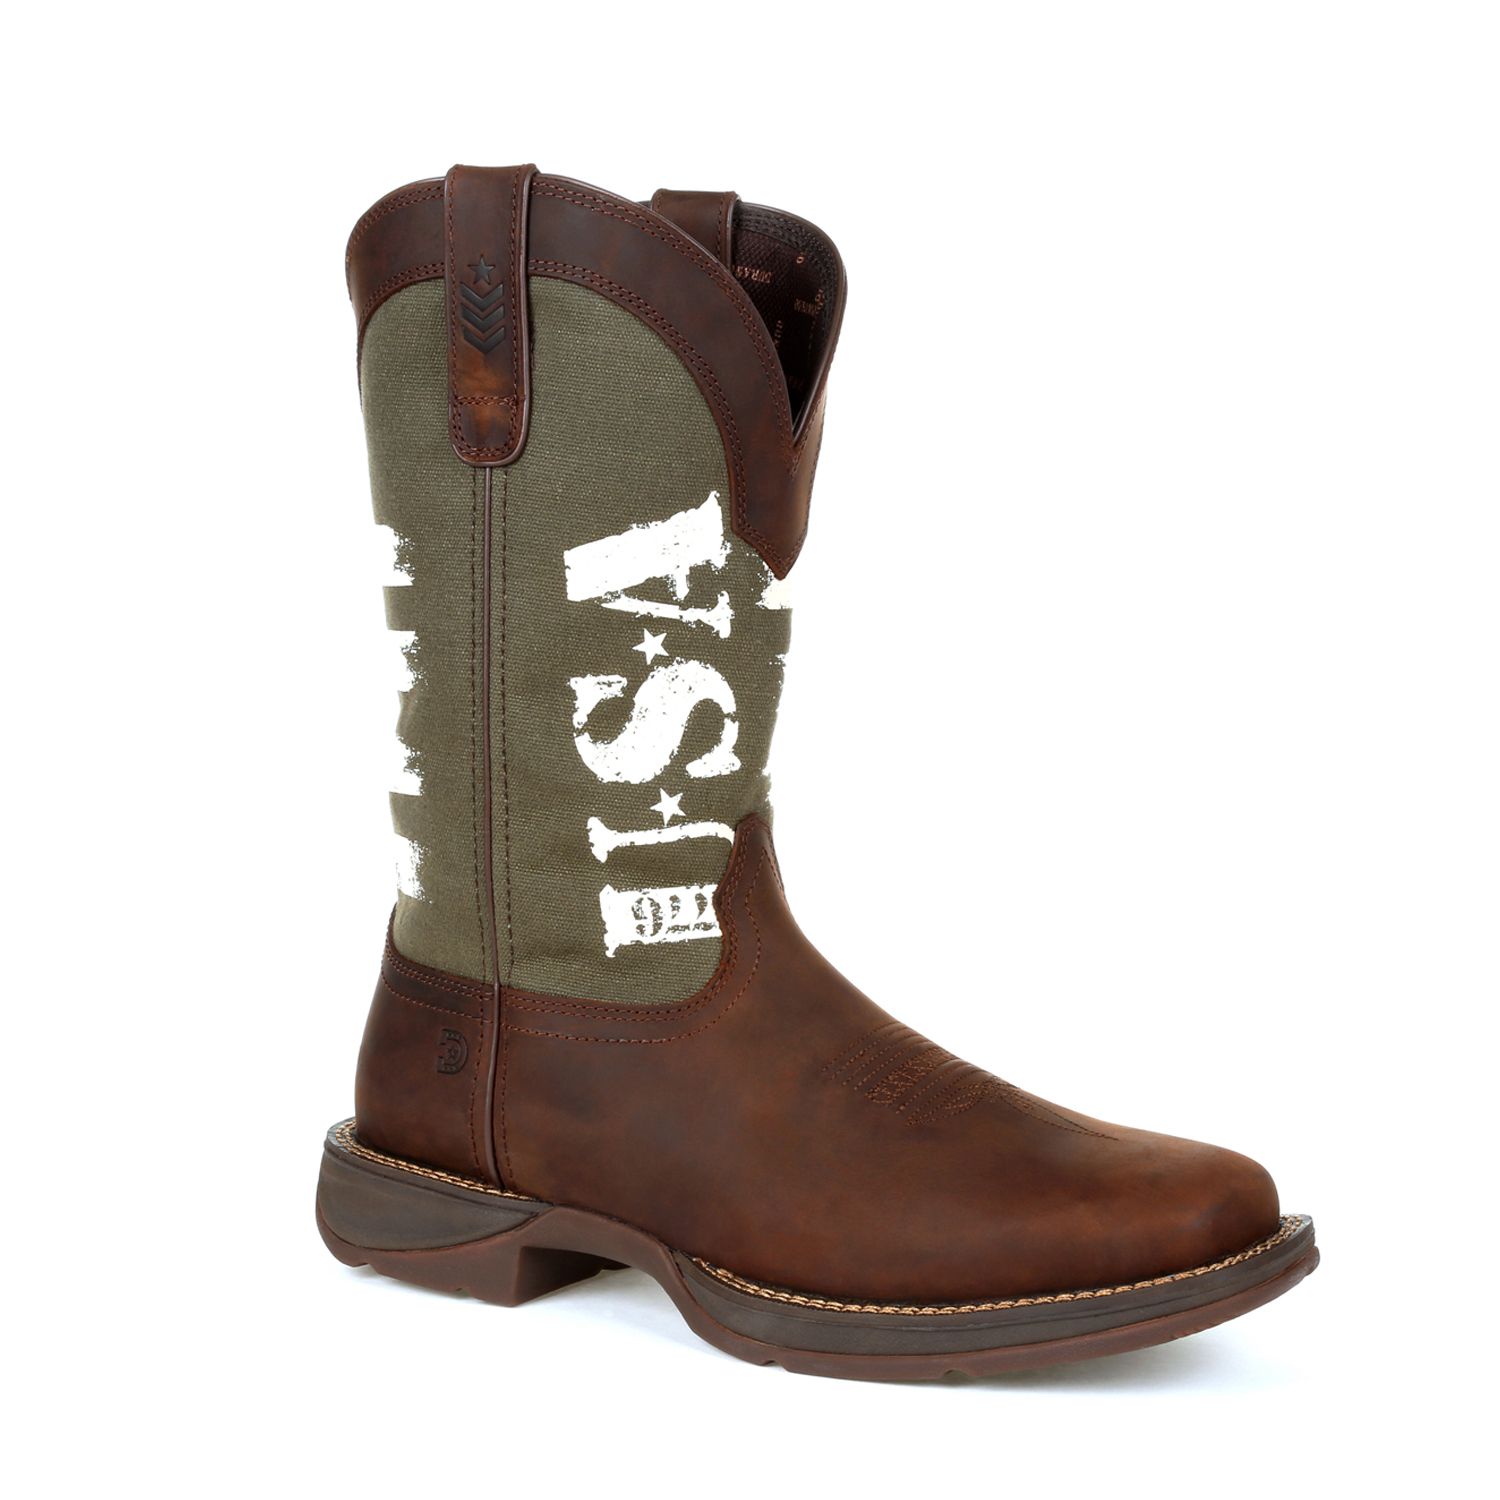 Image for Durango Rebel By USA Men's Western Boots at Kohl's.